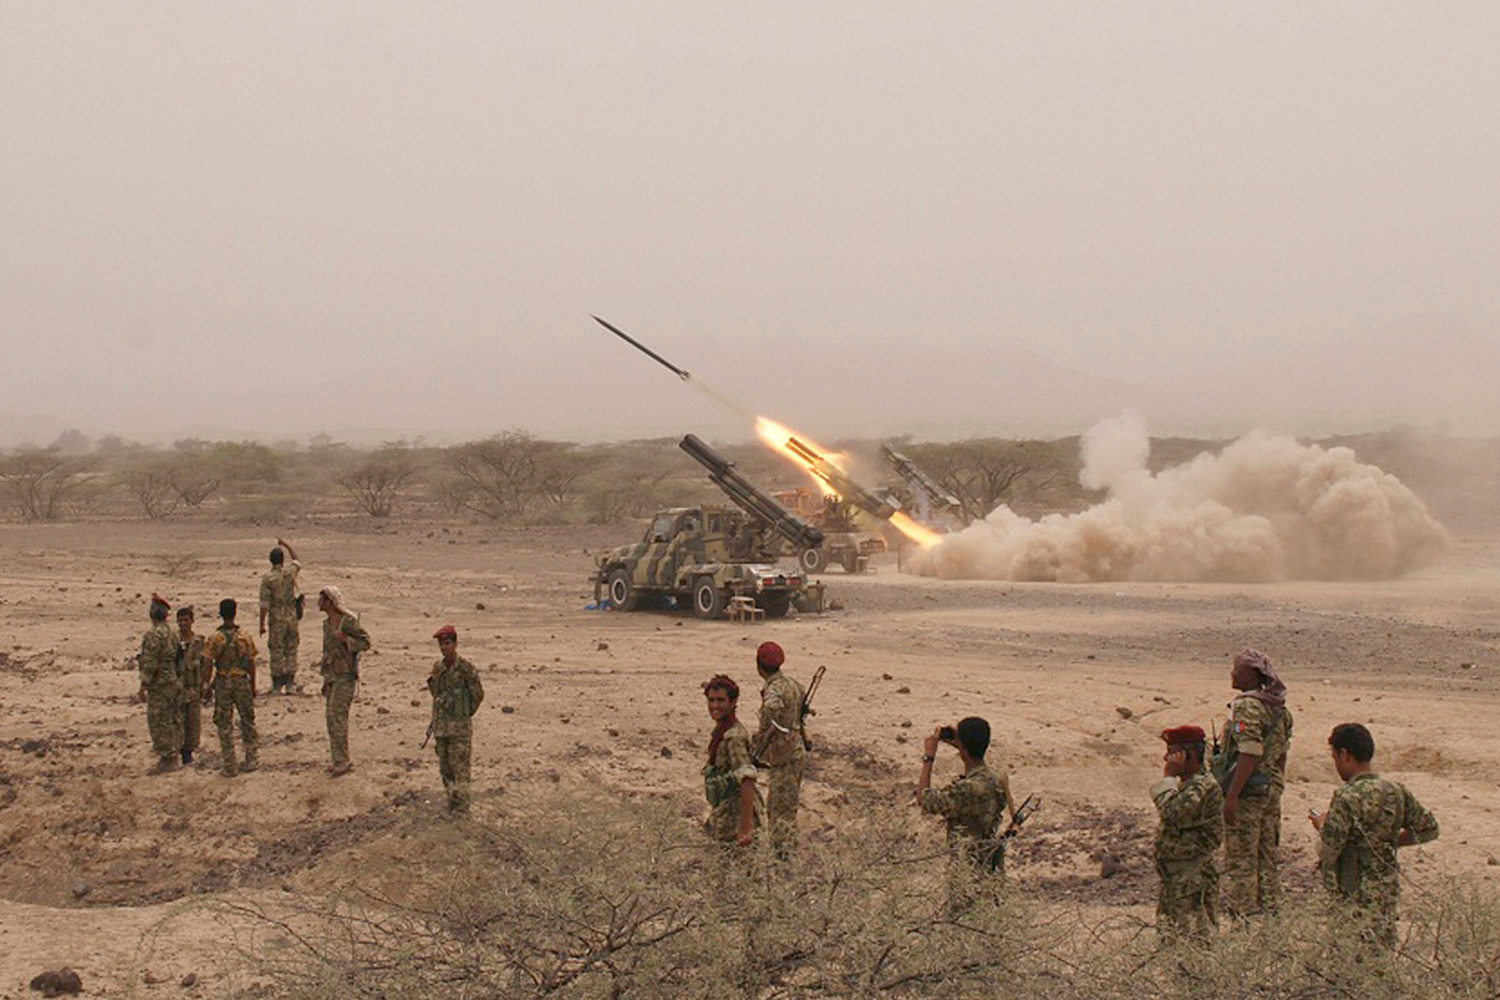 June 4, 2012. Yemeni army forces fire a missile towards al Qaeda-linked militant positions in the southern province of Abyan, Yemen.